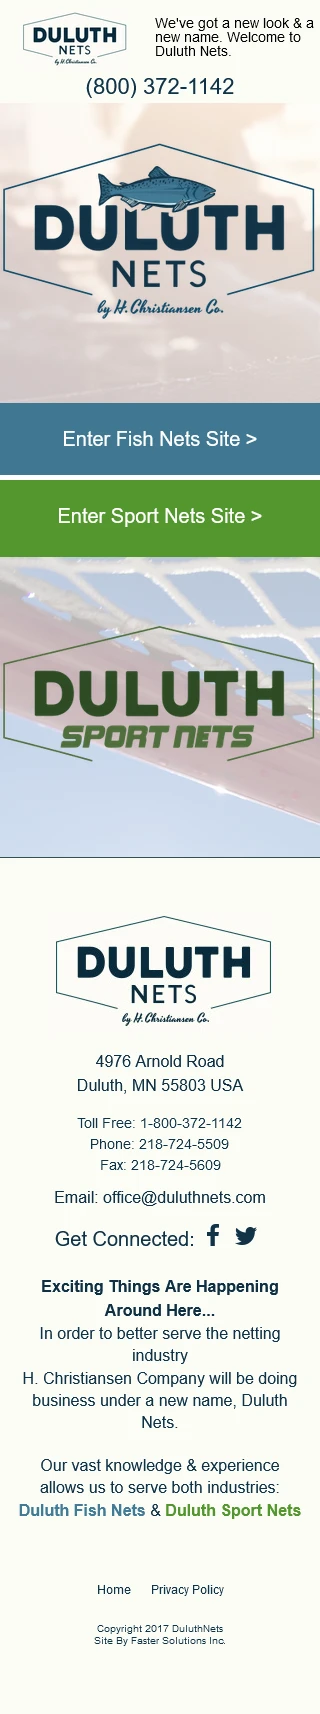 Duluth Nets - Mobile